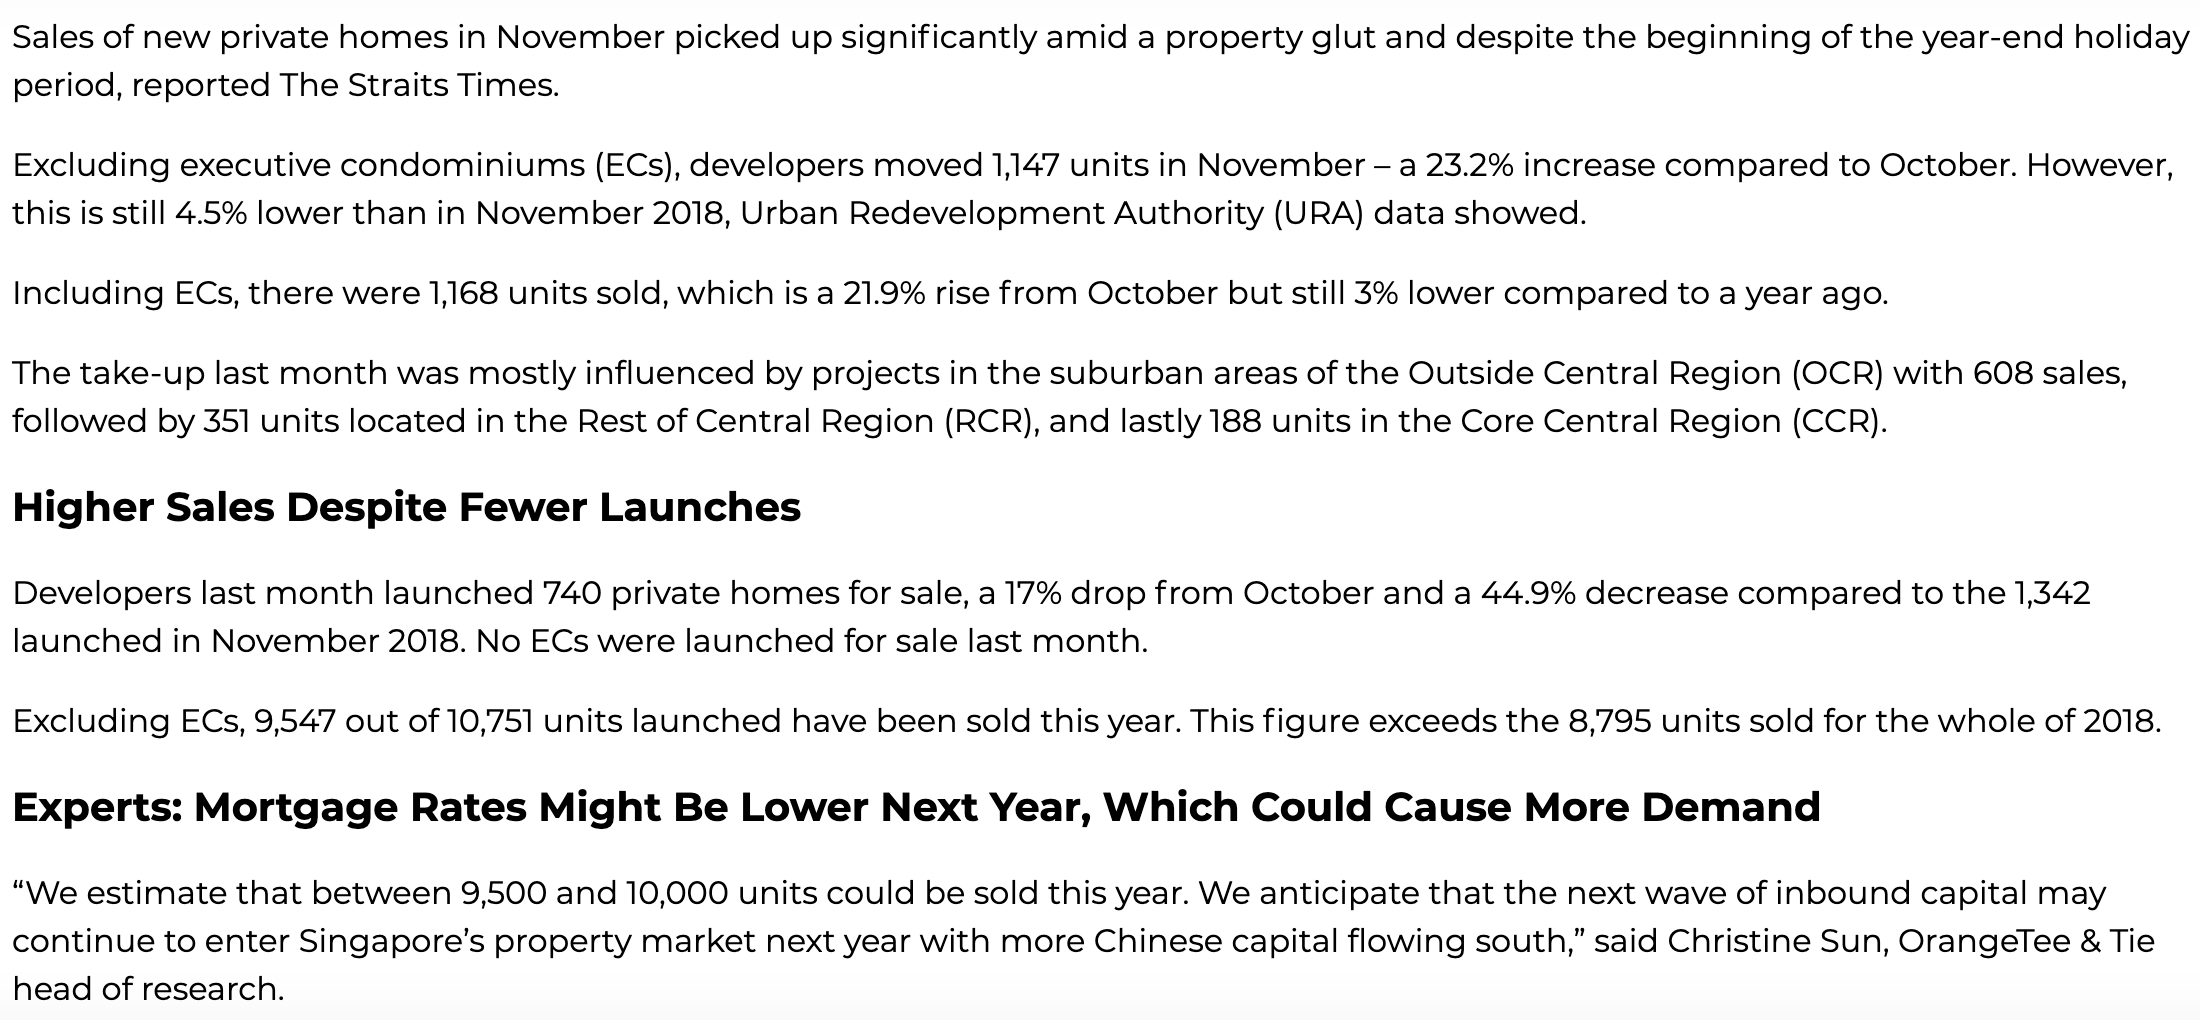 Higher Private Home Sales Recorded In November Despite Property Overhang page 1